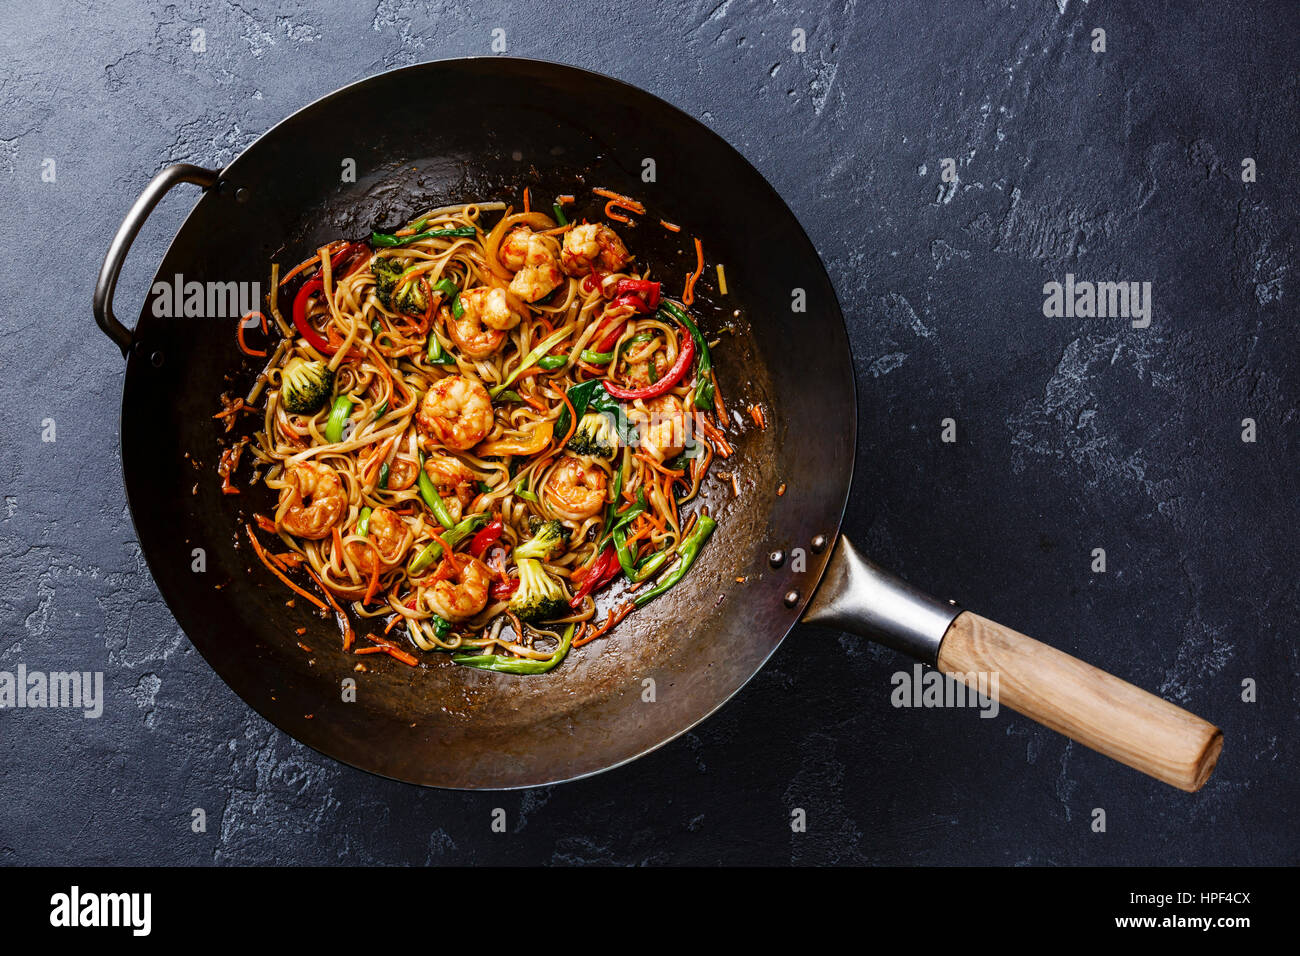 Udon stir-fry noodles with shrimp in wok pan on dark stone background Stock Photo